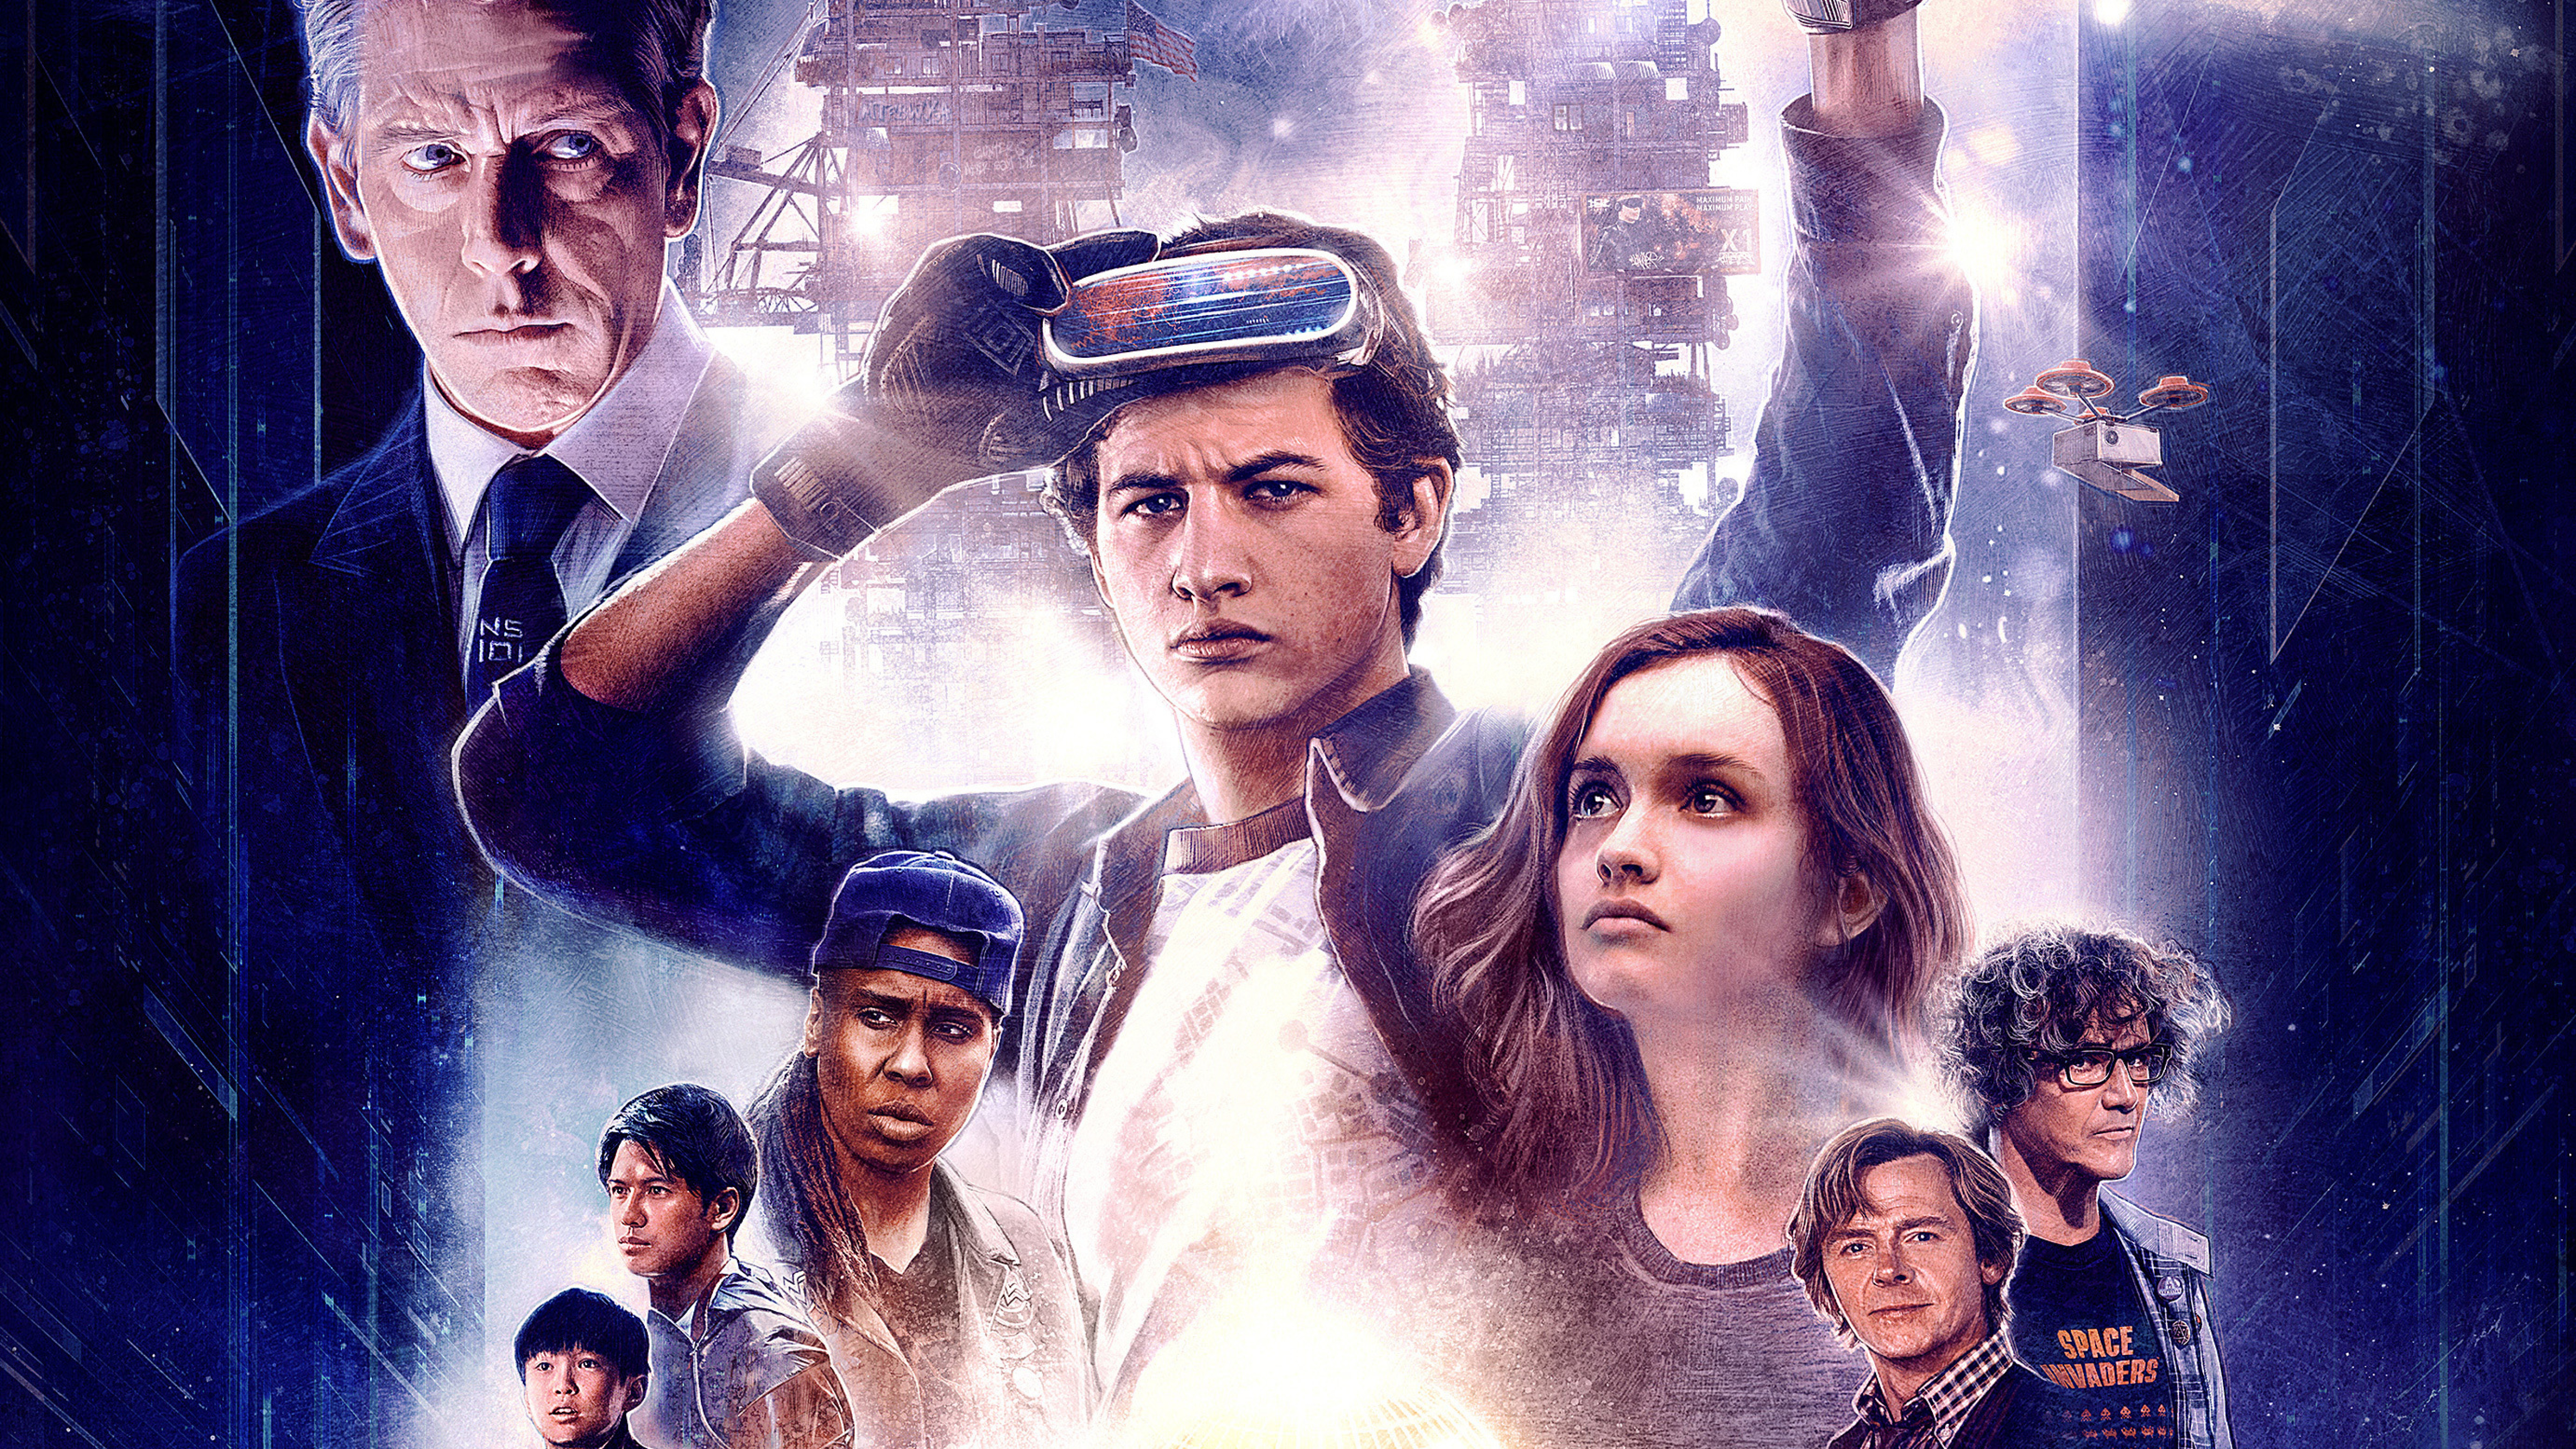 Download Ready Player One, 2018 movie, poster wallpaper 